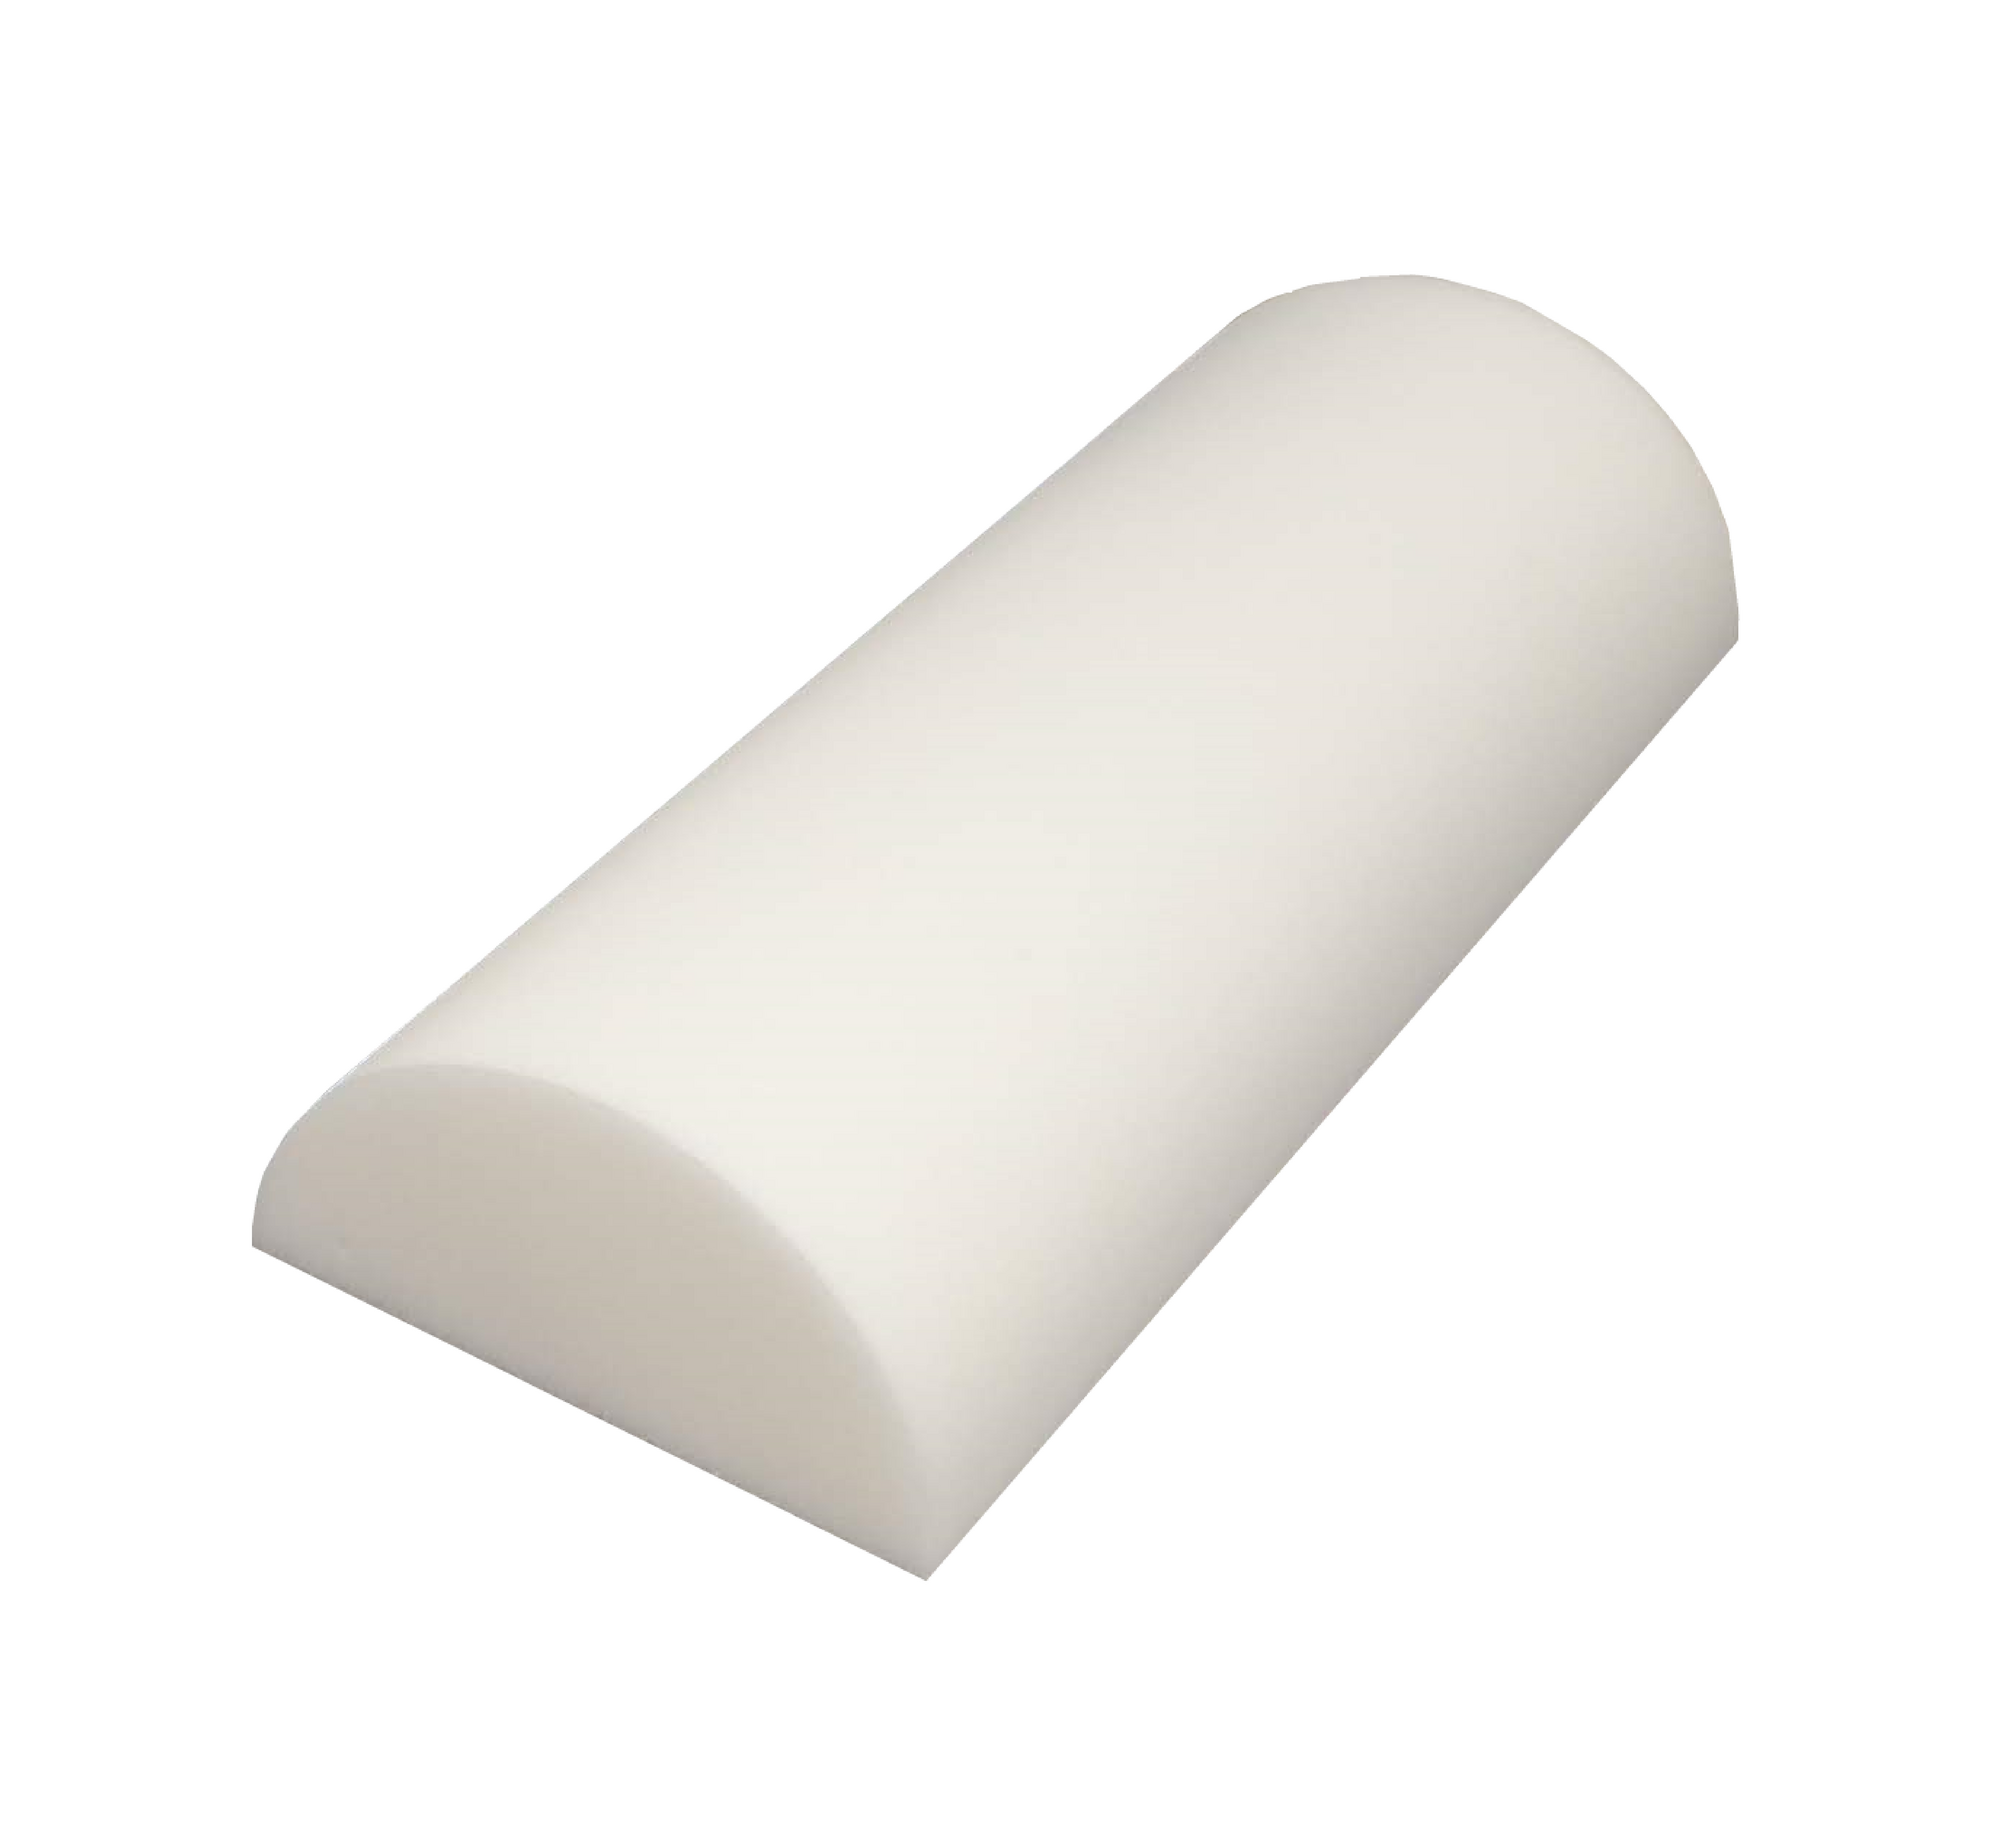 Disposable Body Support Bolster